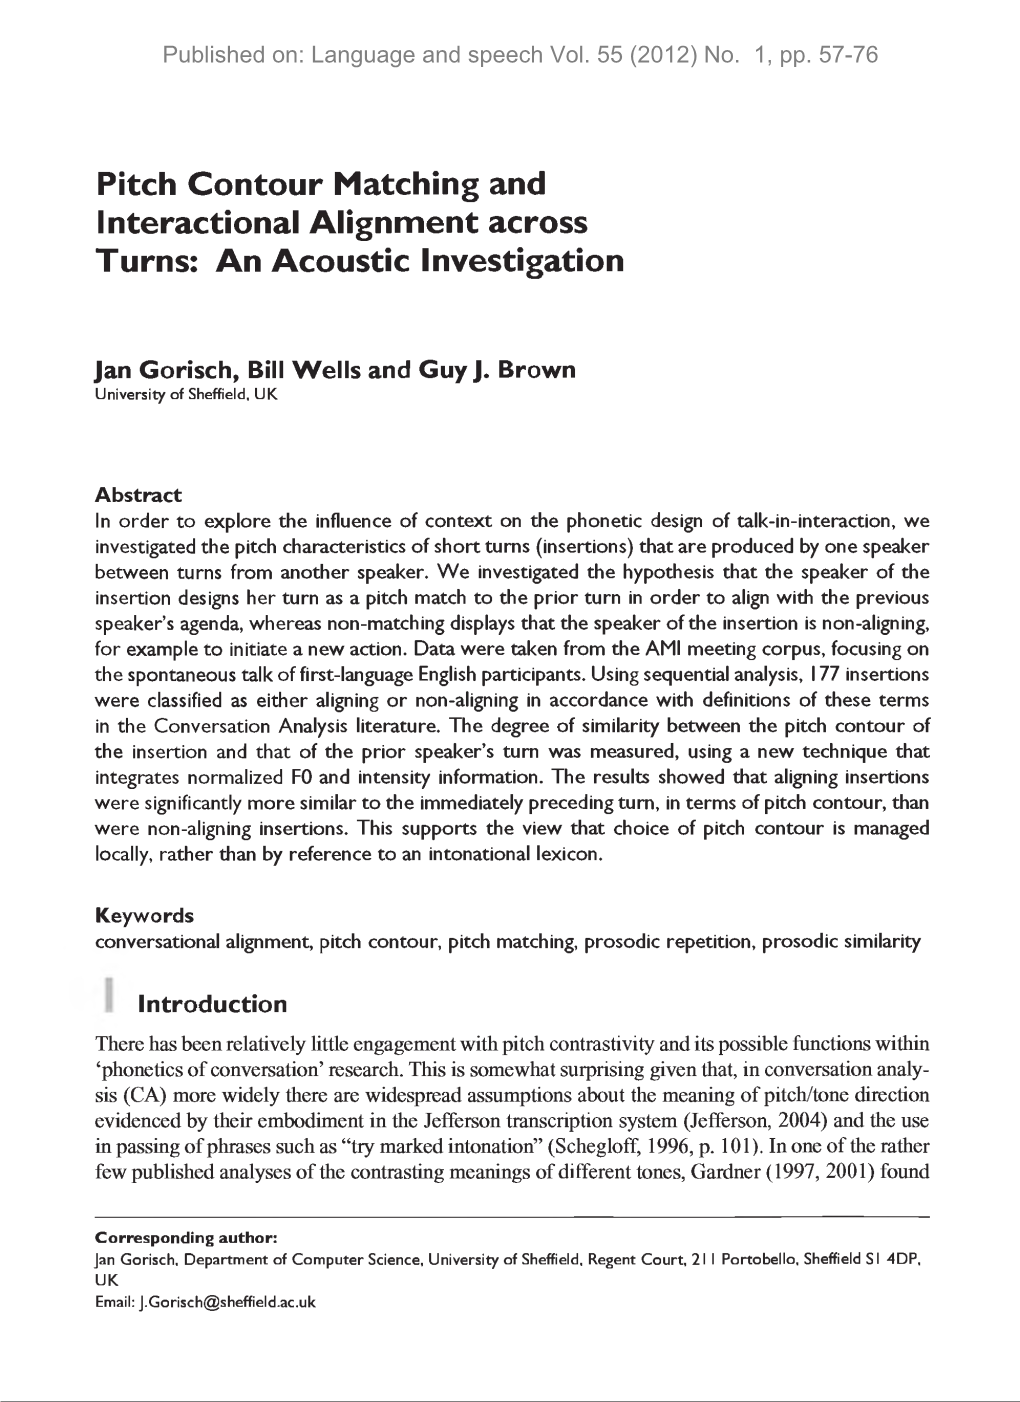 Pitch Contour Matching and Interactional Alignment Across Turns: an Acoustic Investigation